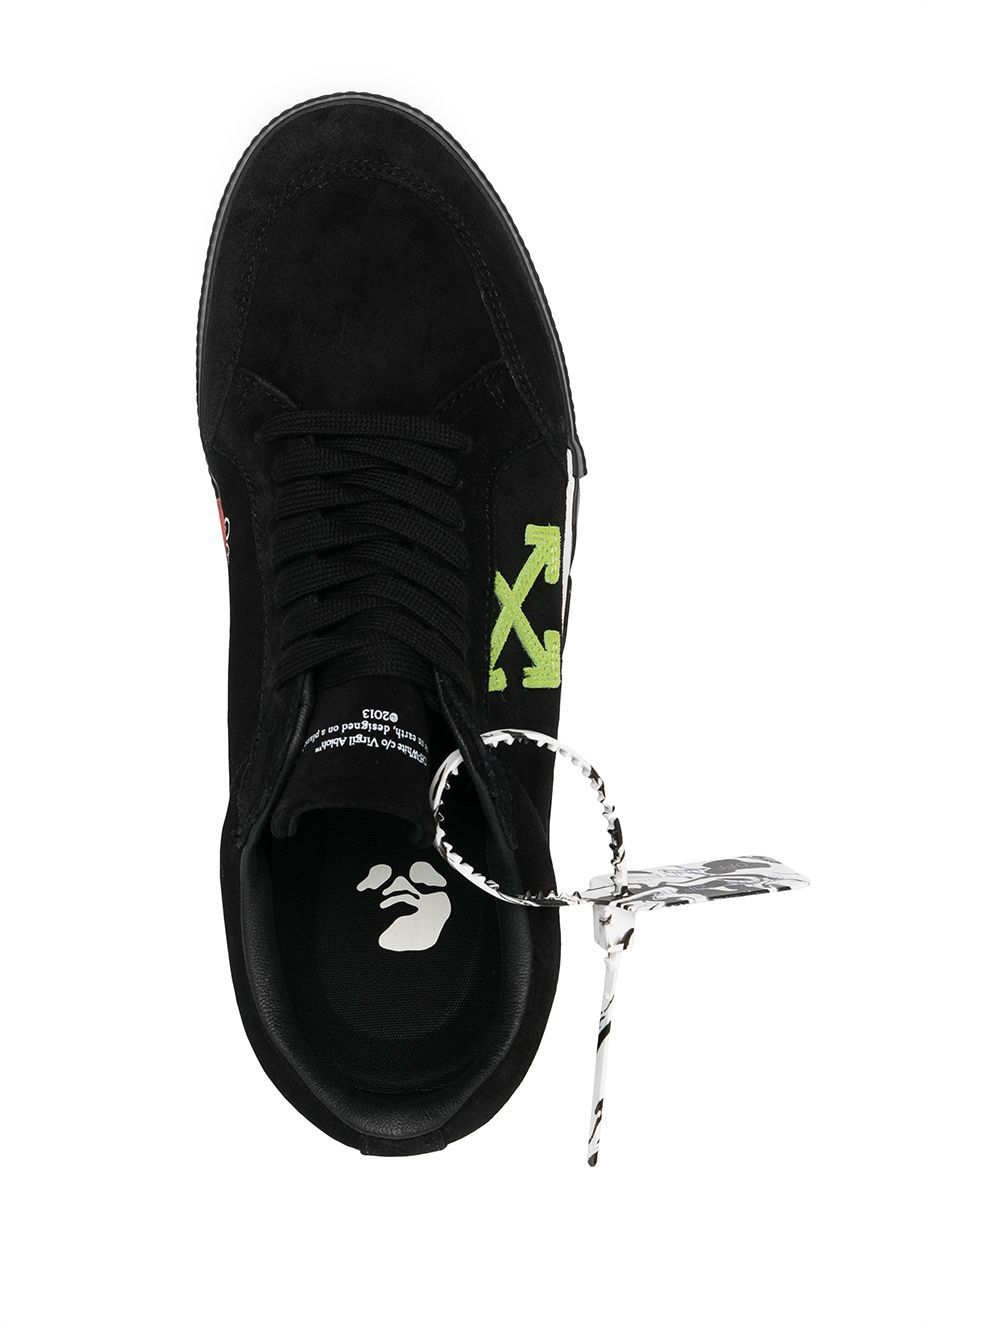 OFF-WHITE Low Vulcanized Suede Sneakers Black/Green - MAISONDEFASHION.COM